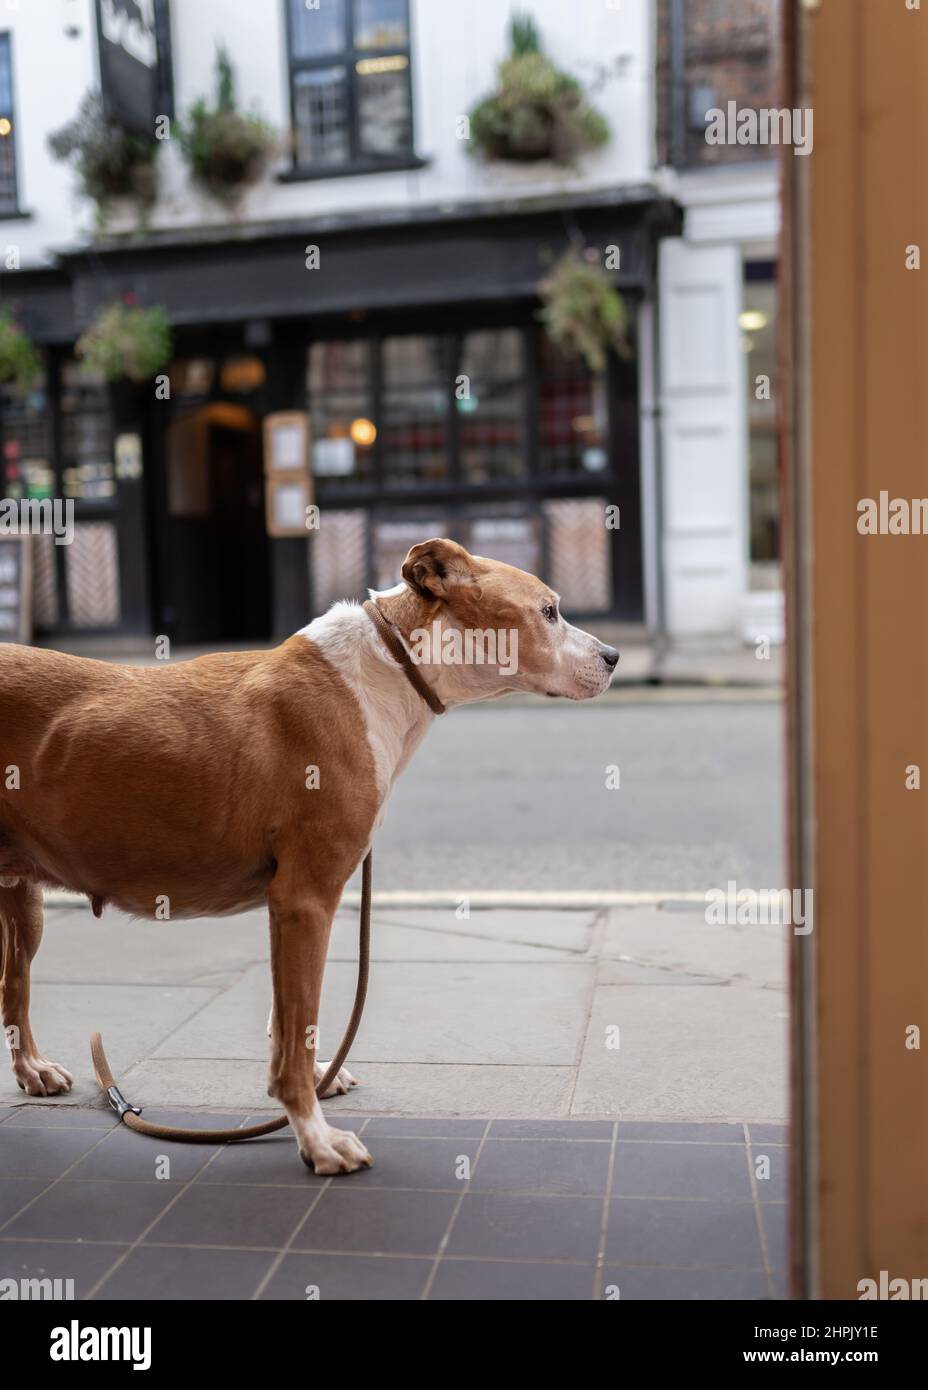 Dog looking sad and lost abandoned on street outside shop waiting for its owner to return. Stock Photo